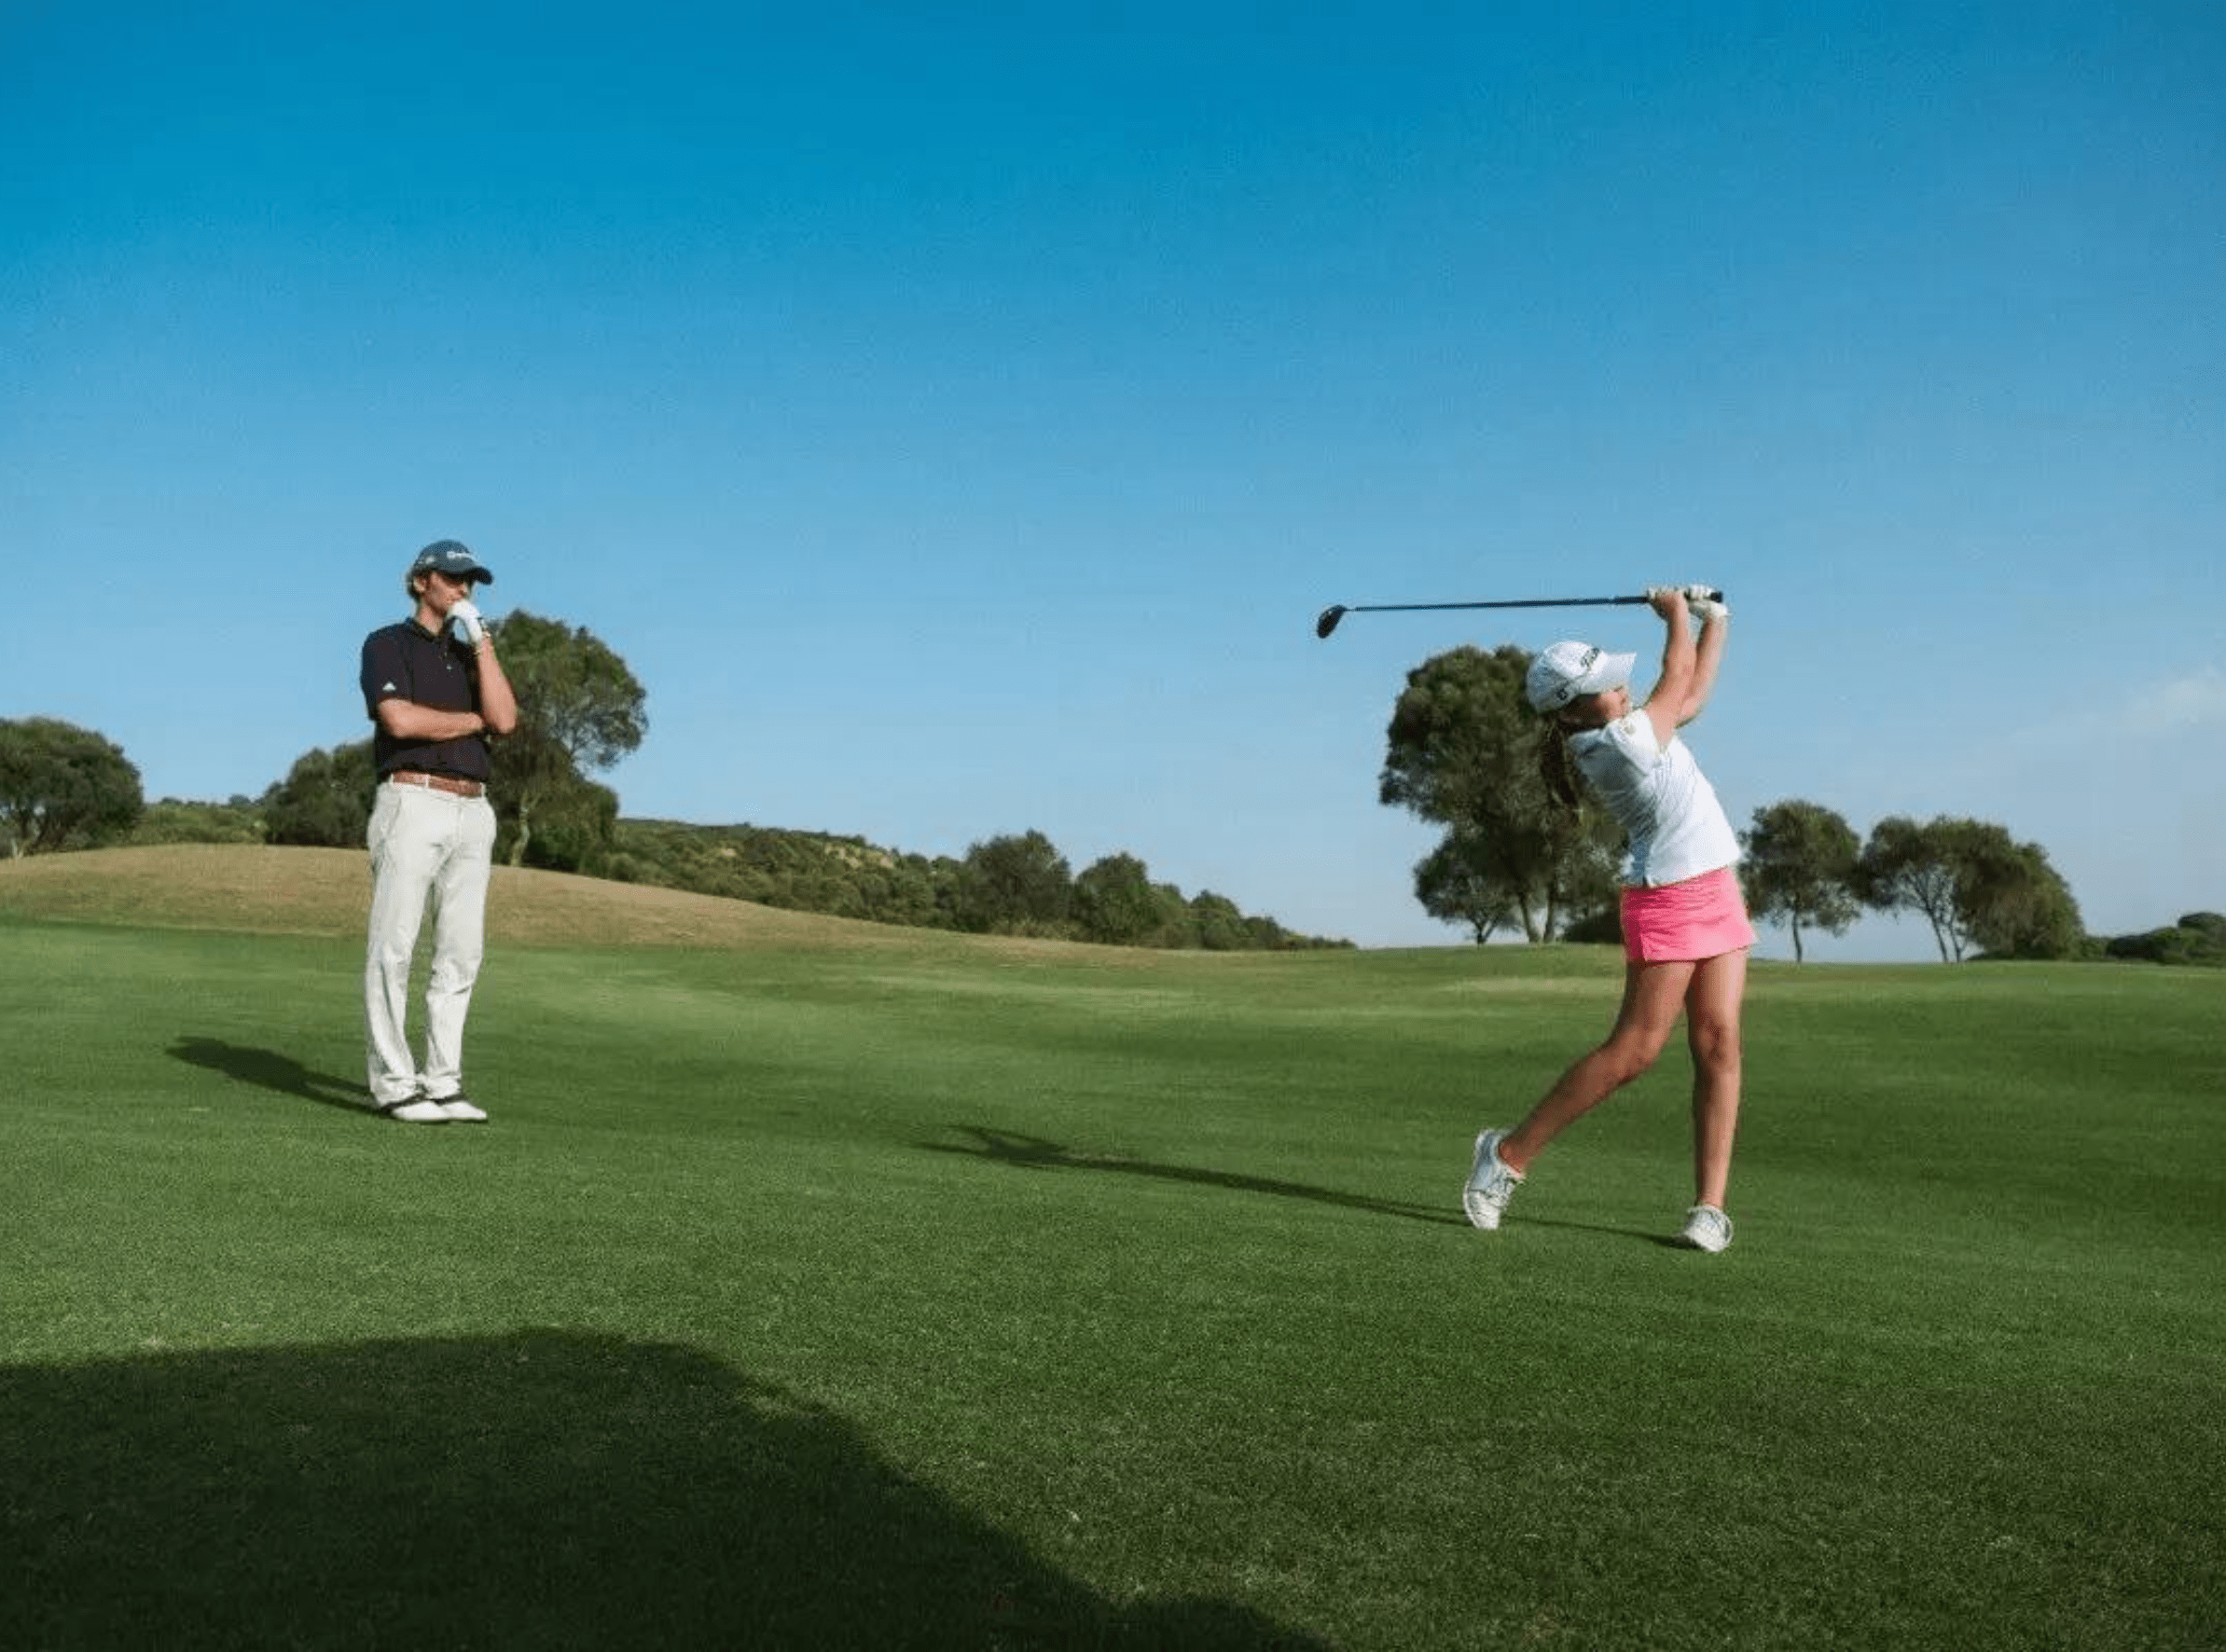 Two individuals playing golf on the prestigious grounds of Sotogrande, enjoying the luxury amenities and leisure activities offered by the esteemed real estate community.